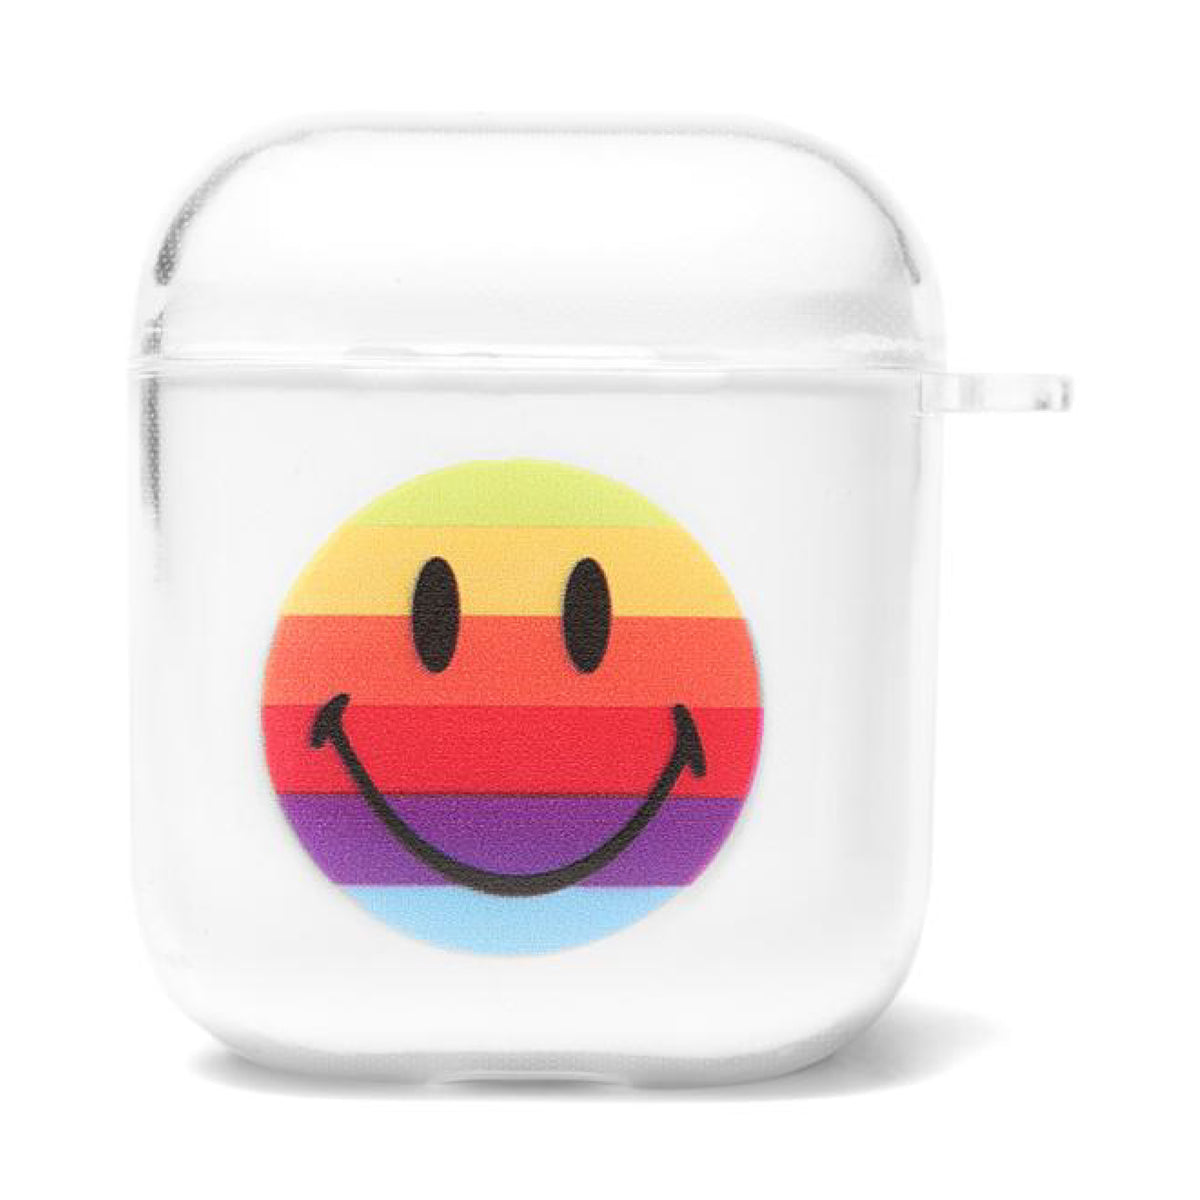 Chinatown Market Smiley Tech Airpods Case